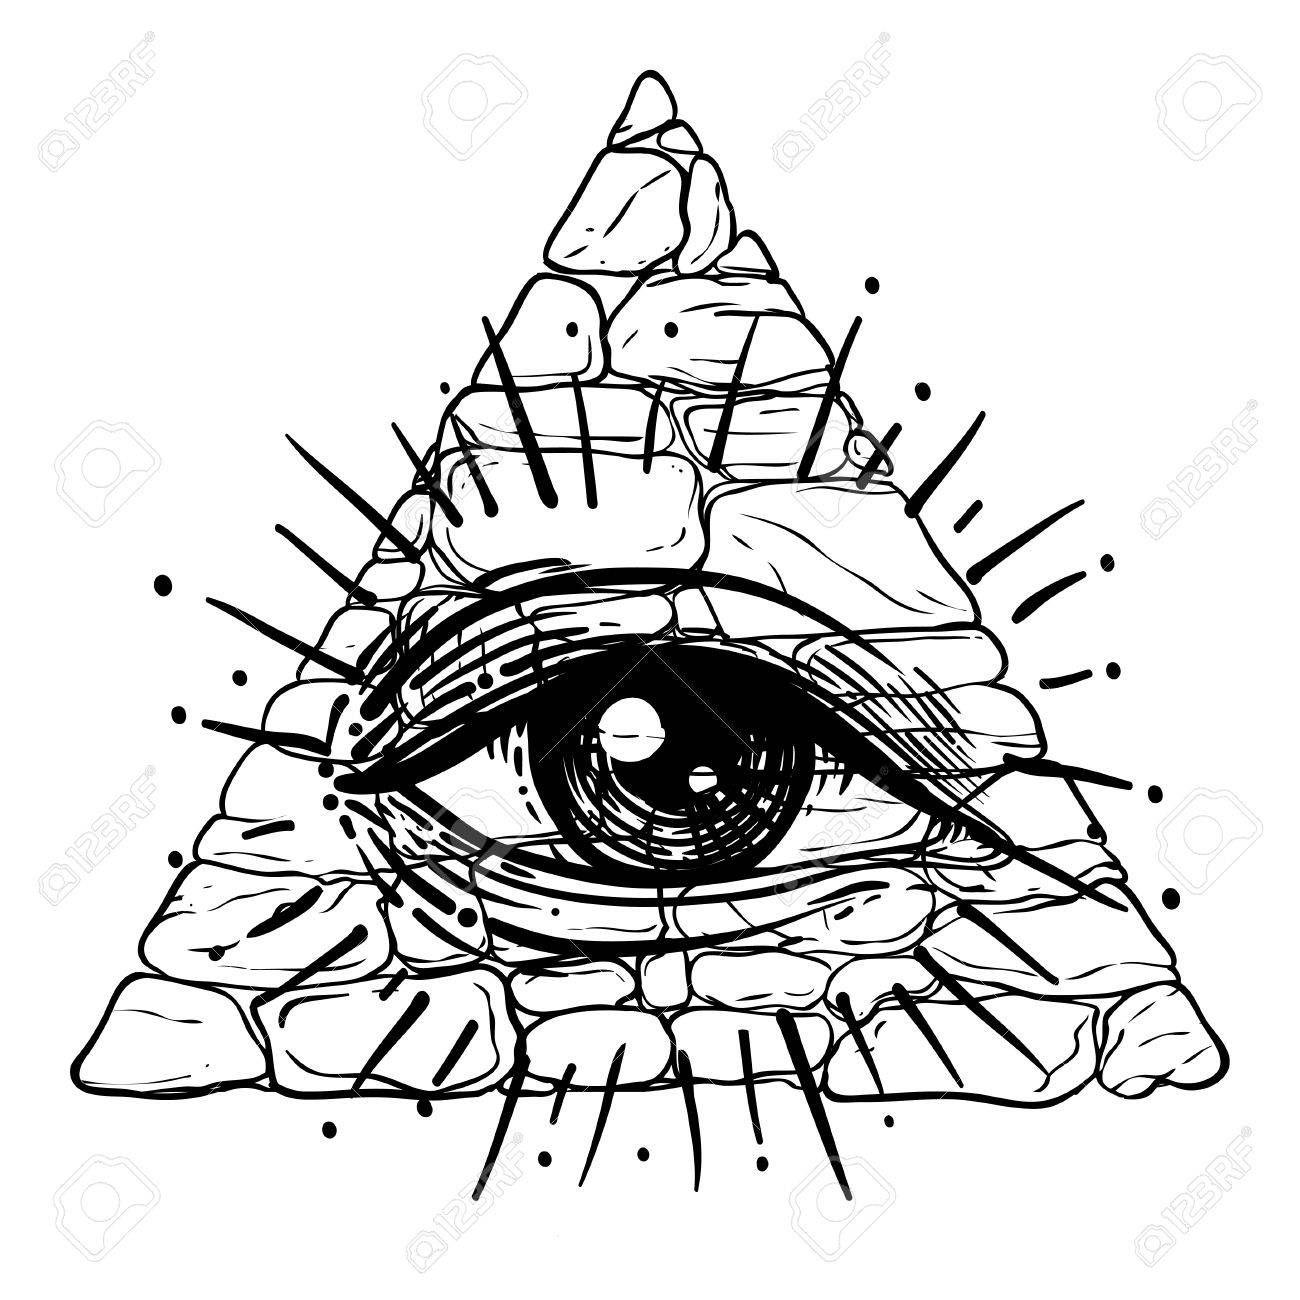 Black and White Triangle with Eye Logo - Illuminati Eye Drawing.com. Free for personal use